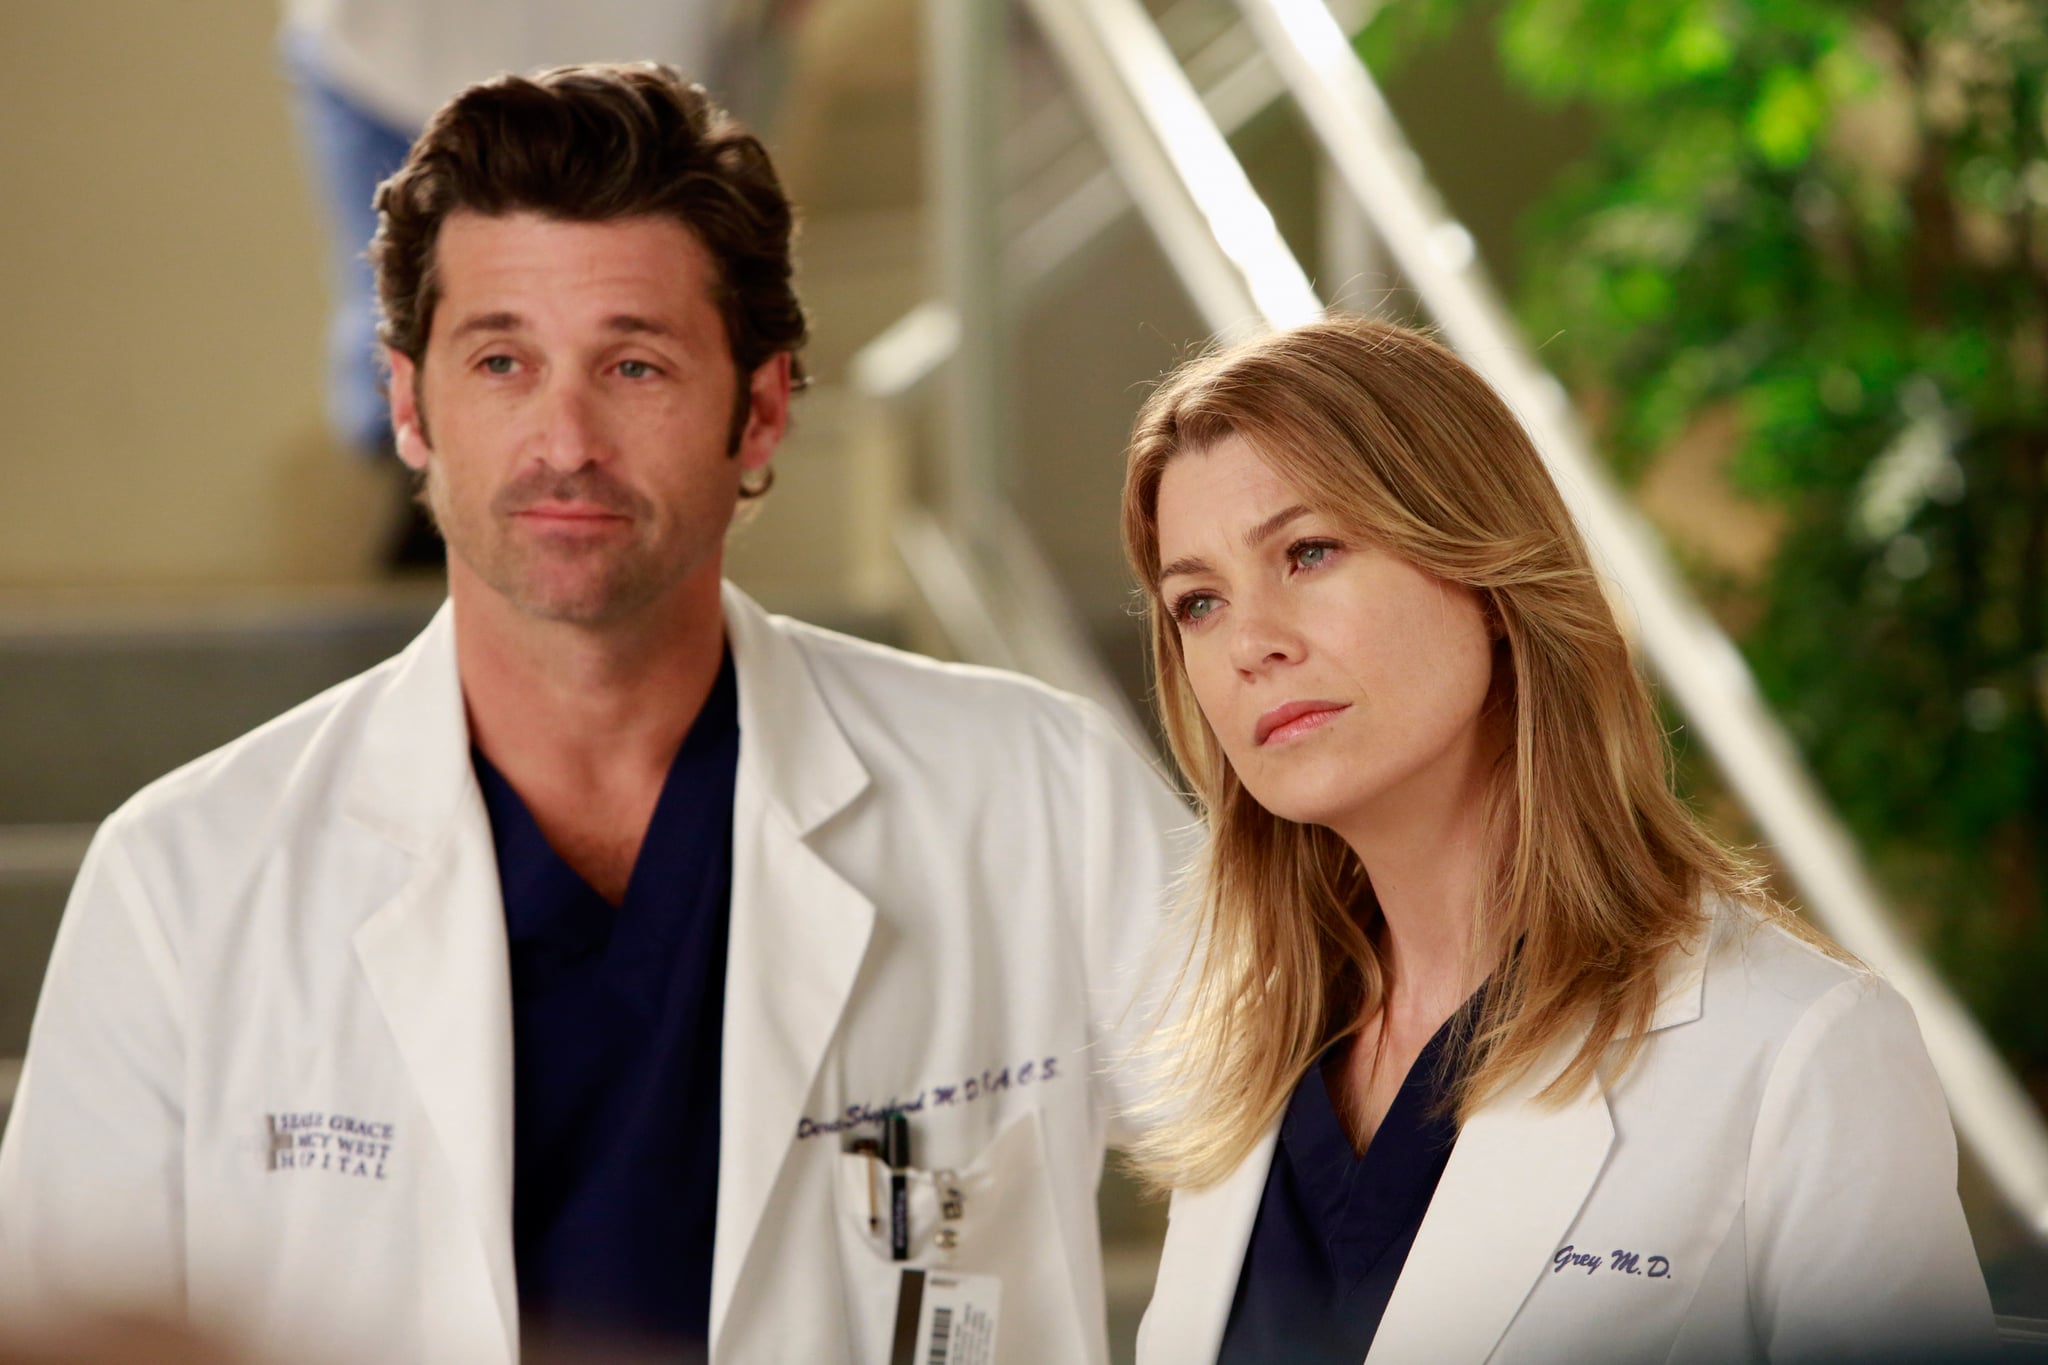 GREY'S ANATOMY, (from left): Patrick Demsey, Ellen Pompeo, 'Love Turns You Upside Down', (Season 9, ep. 908, aired Dec. 6, 2012), 2005-. photo: Ron Tom / ABC / courtesy Everett Collection